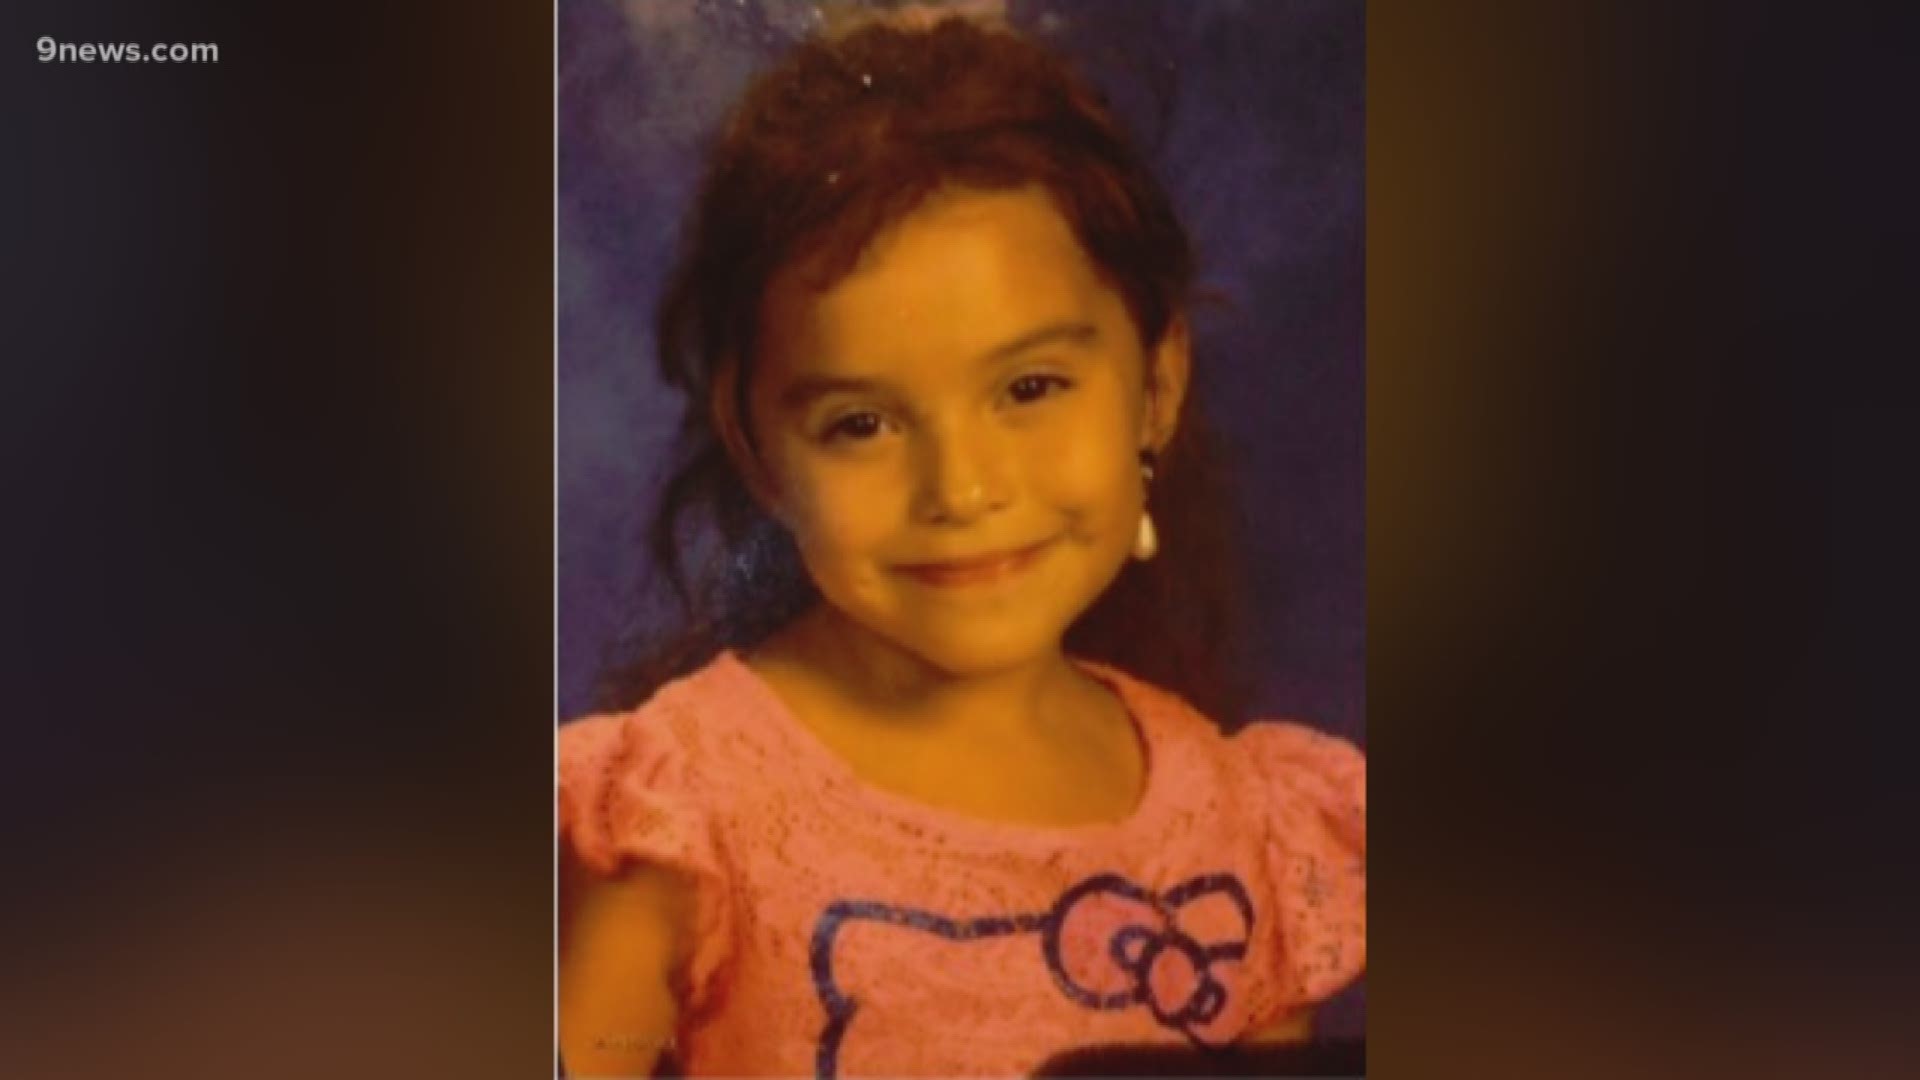 Missing girl, 8, last seen Sunday night near 32nd Street and Champa Street in Denver. If you see her call 911.